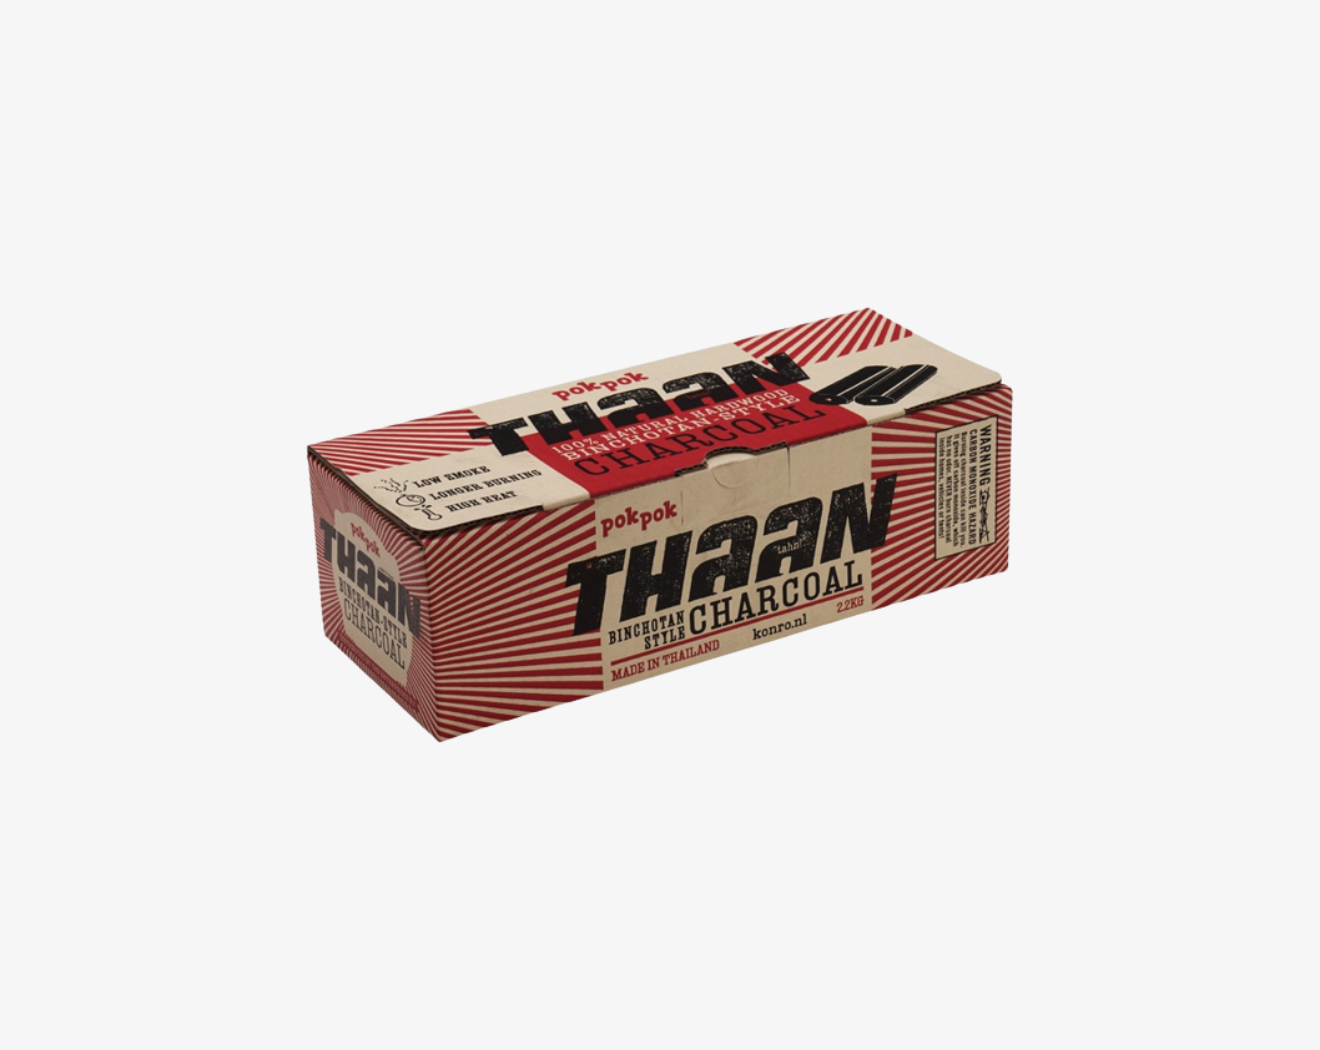 Thaan charcoal 2,2 kg